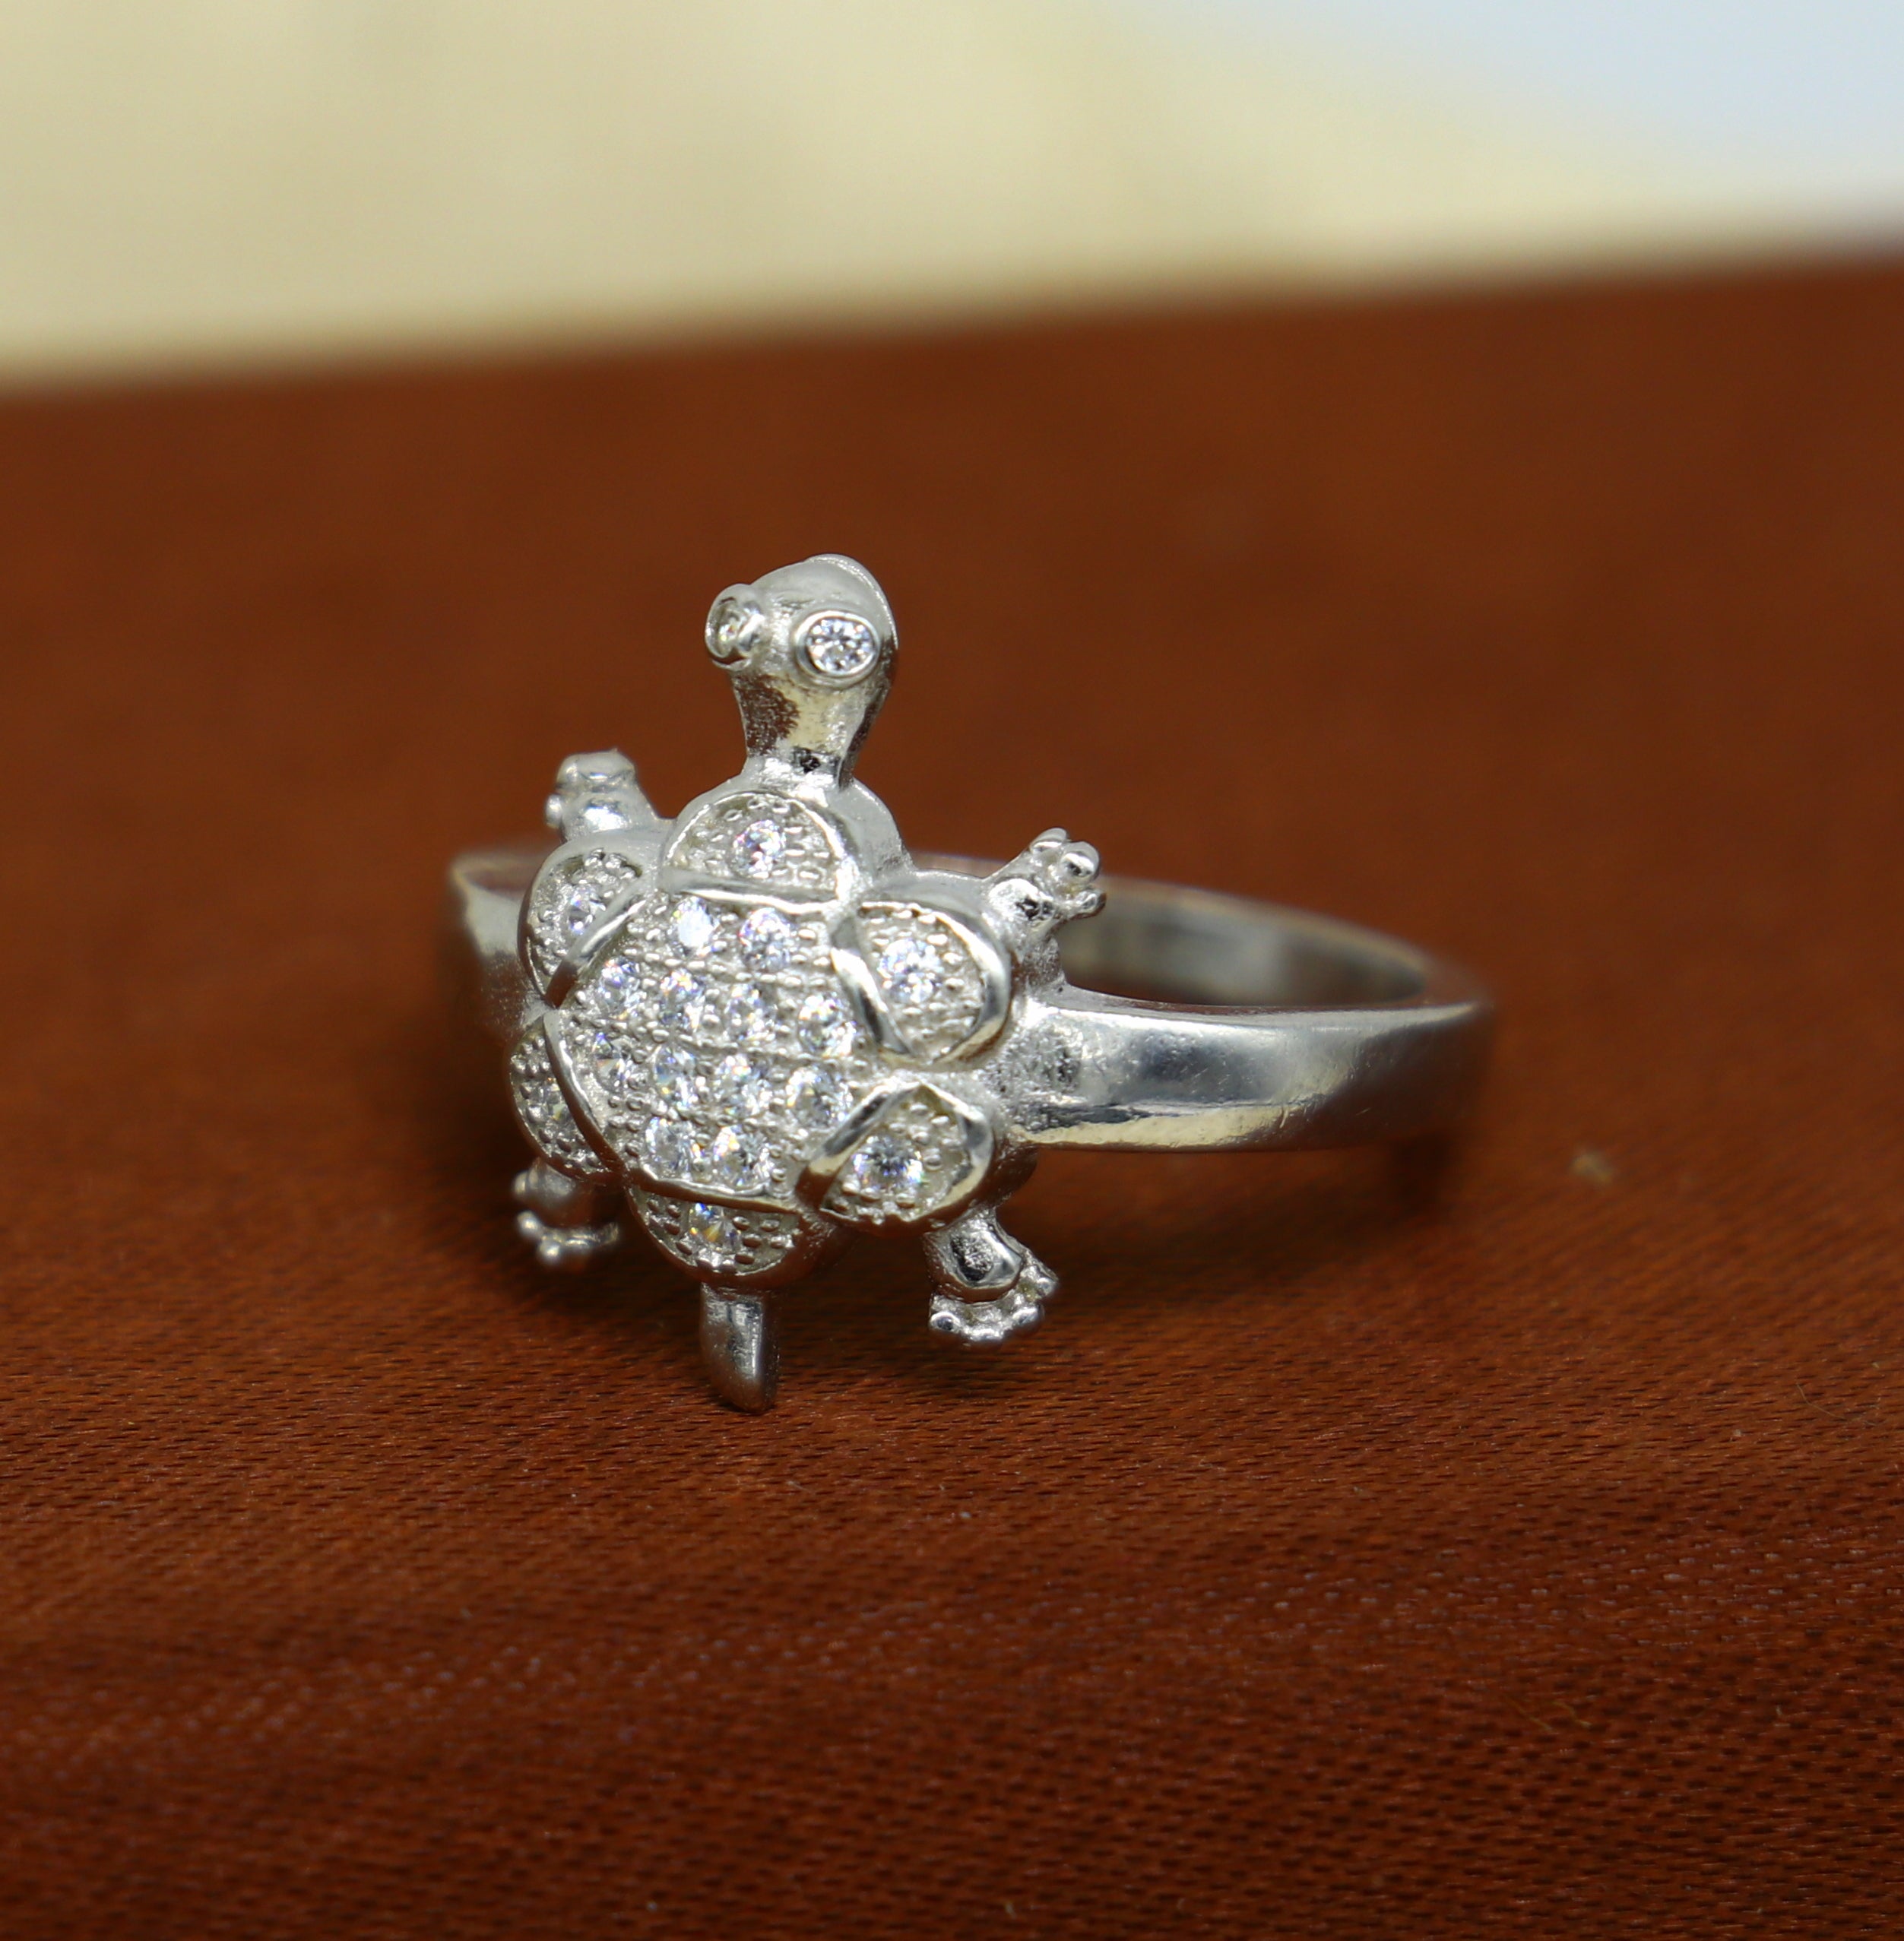 Om Tortoise Ring in Sterling Silver with American Diamond